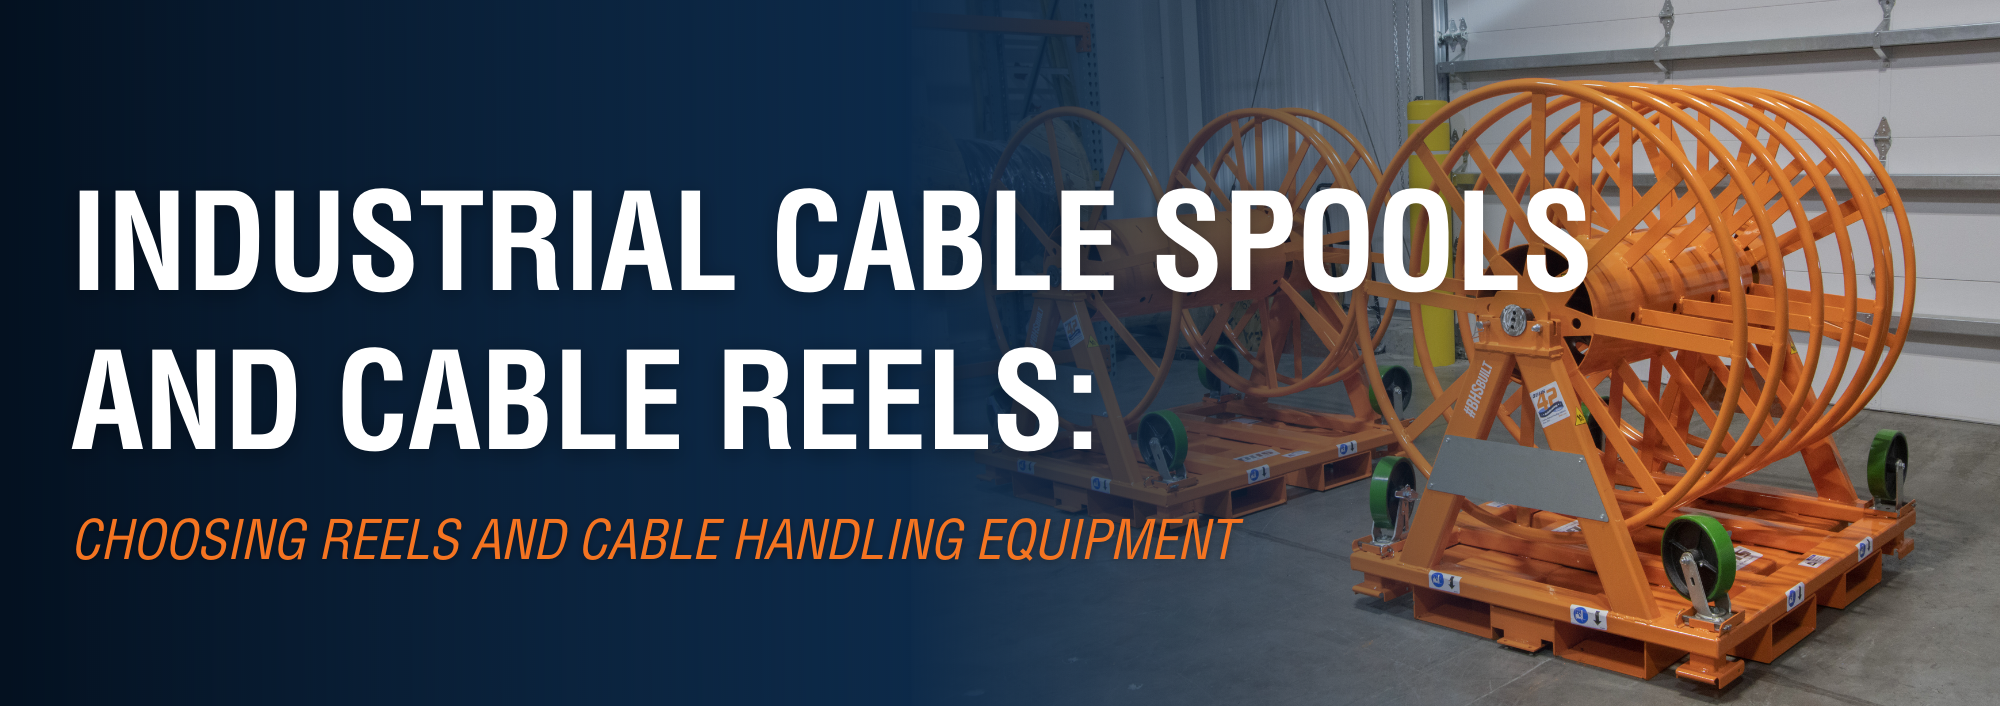 Industrial Cable Spools and Cable Reels: Choosing Reels and Cable